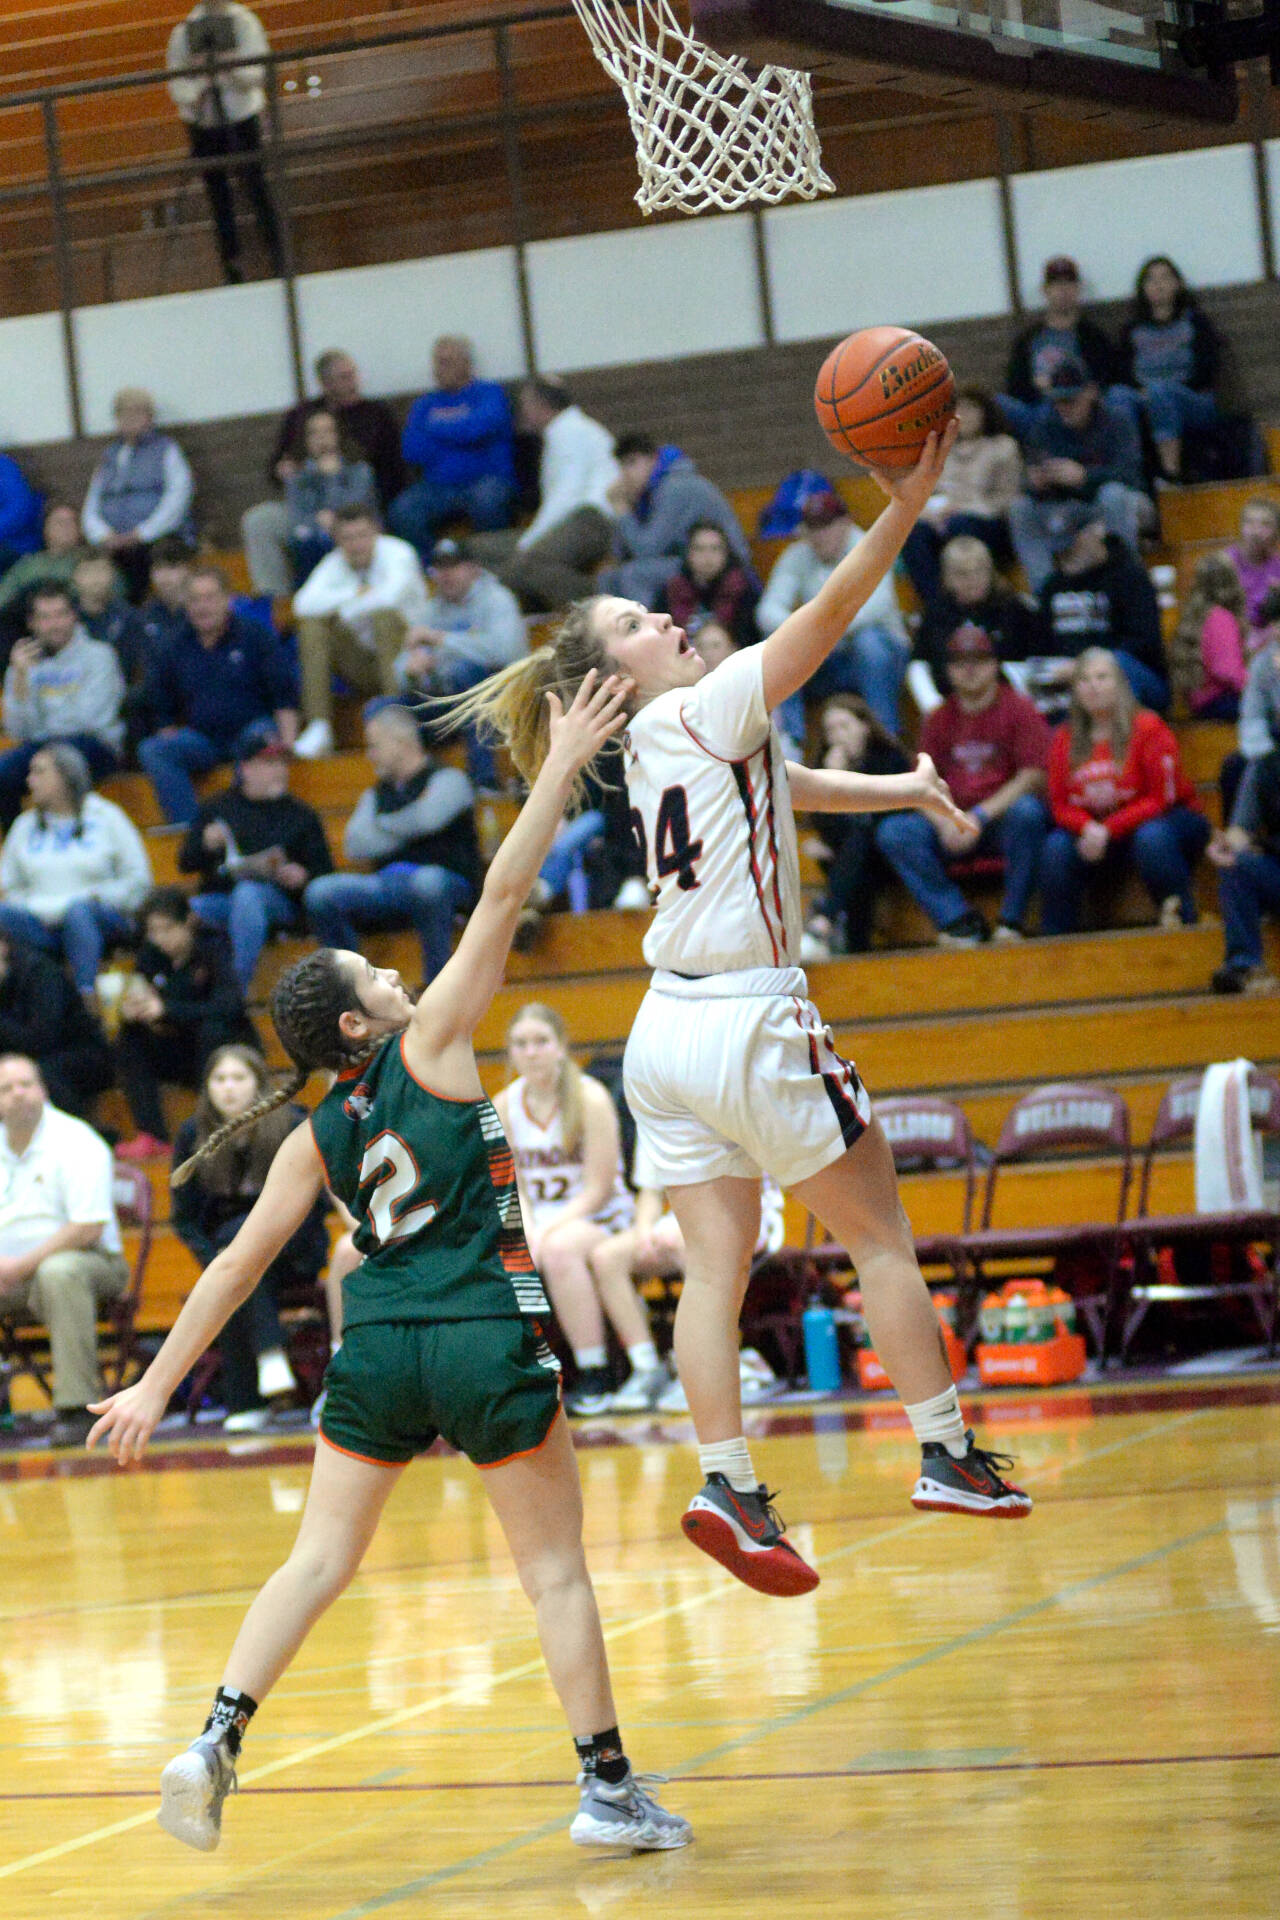 DAILY WORLD FILE PHOTO Raymond sophomore Karsyn Freeman (24) glides to the basket in a game against Morton-White Pass on Feb. 4 in Montesano. Freeman was named the 2B Pacific League MVP by the league’s coaches for the 2022-23 season.